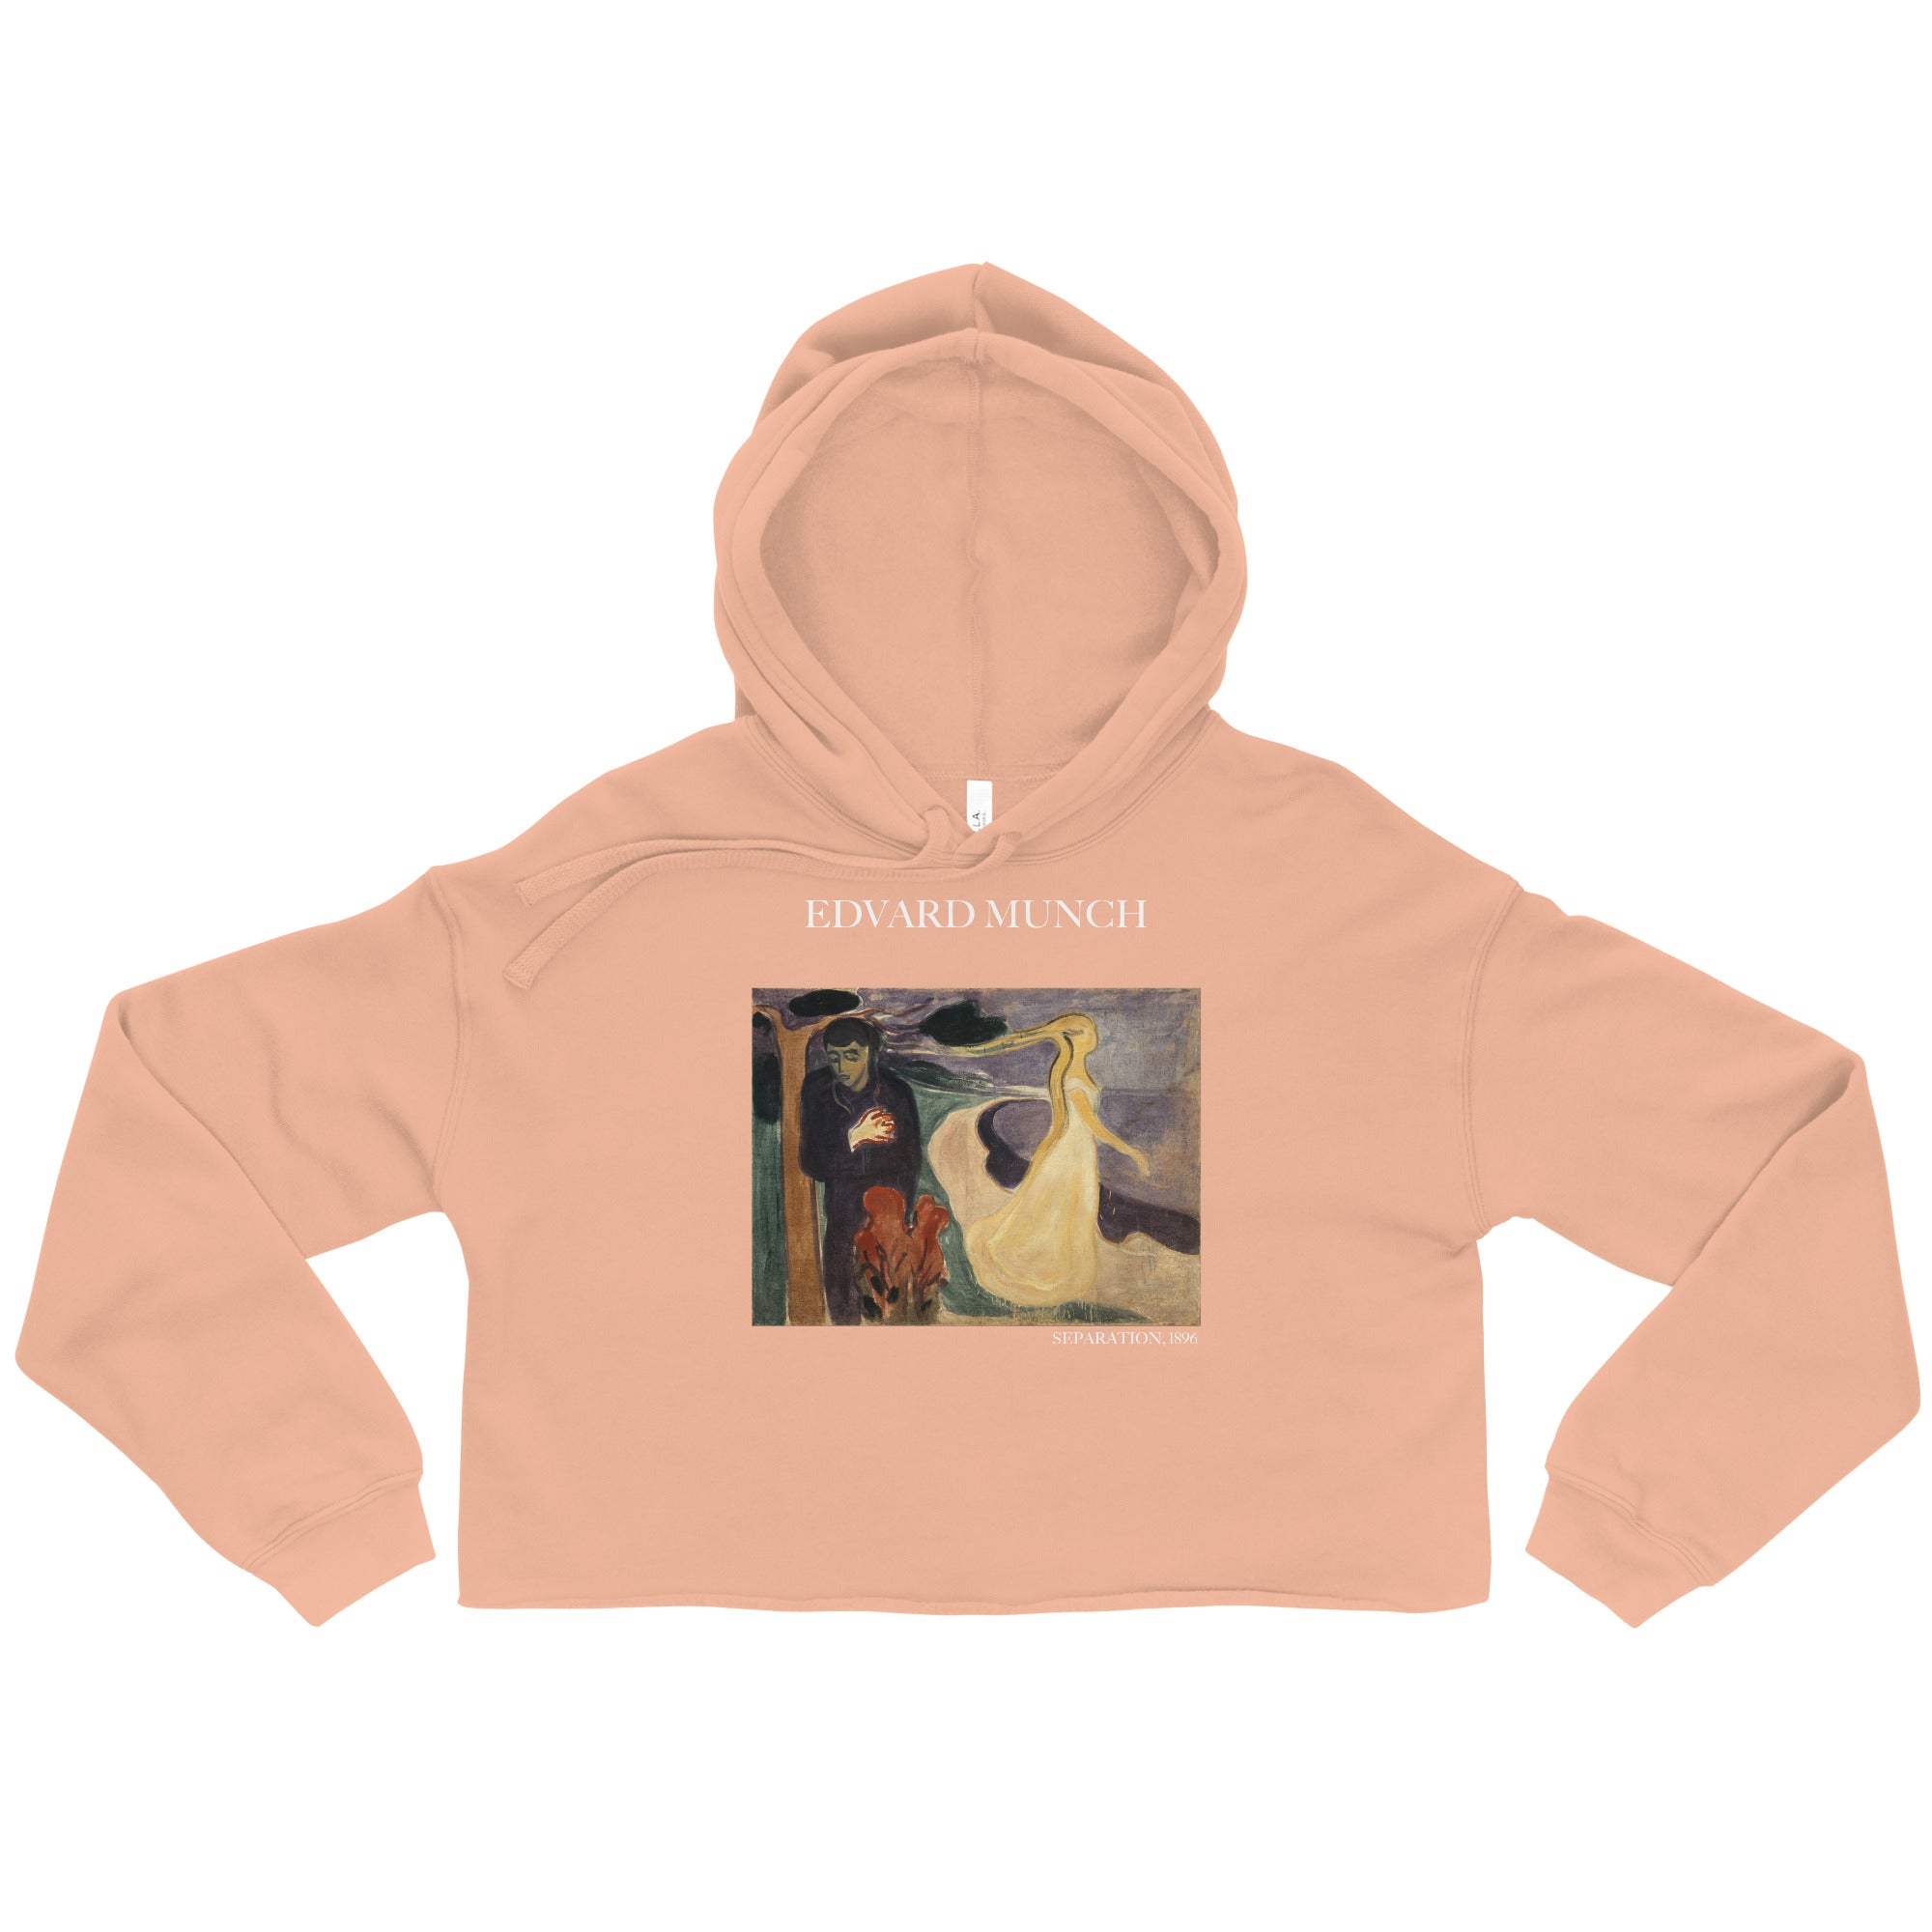 Edvard Munch 'Separation' Famous Painting Cropped Hoodie | Premium Art Cropped Hoodie